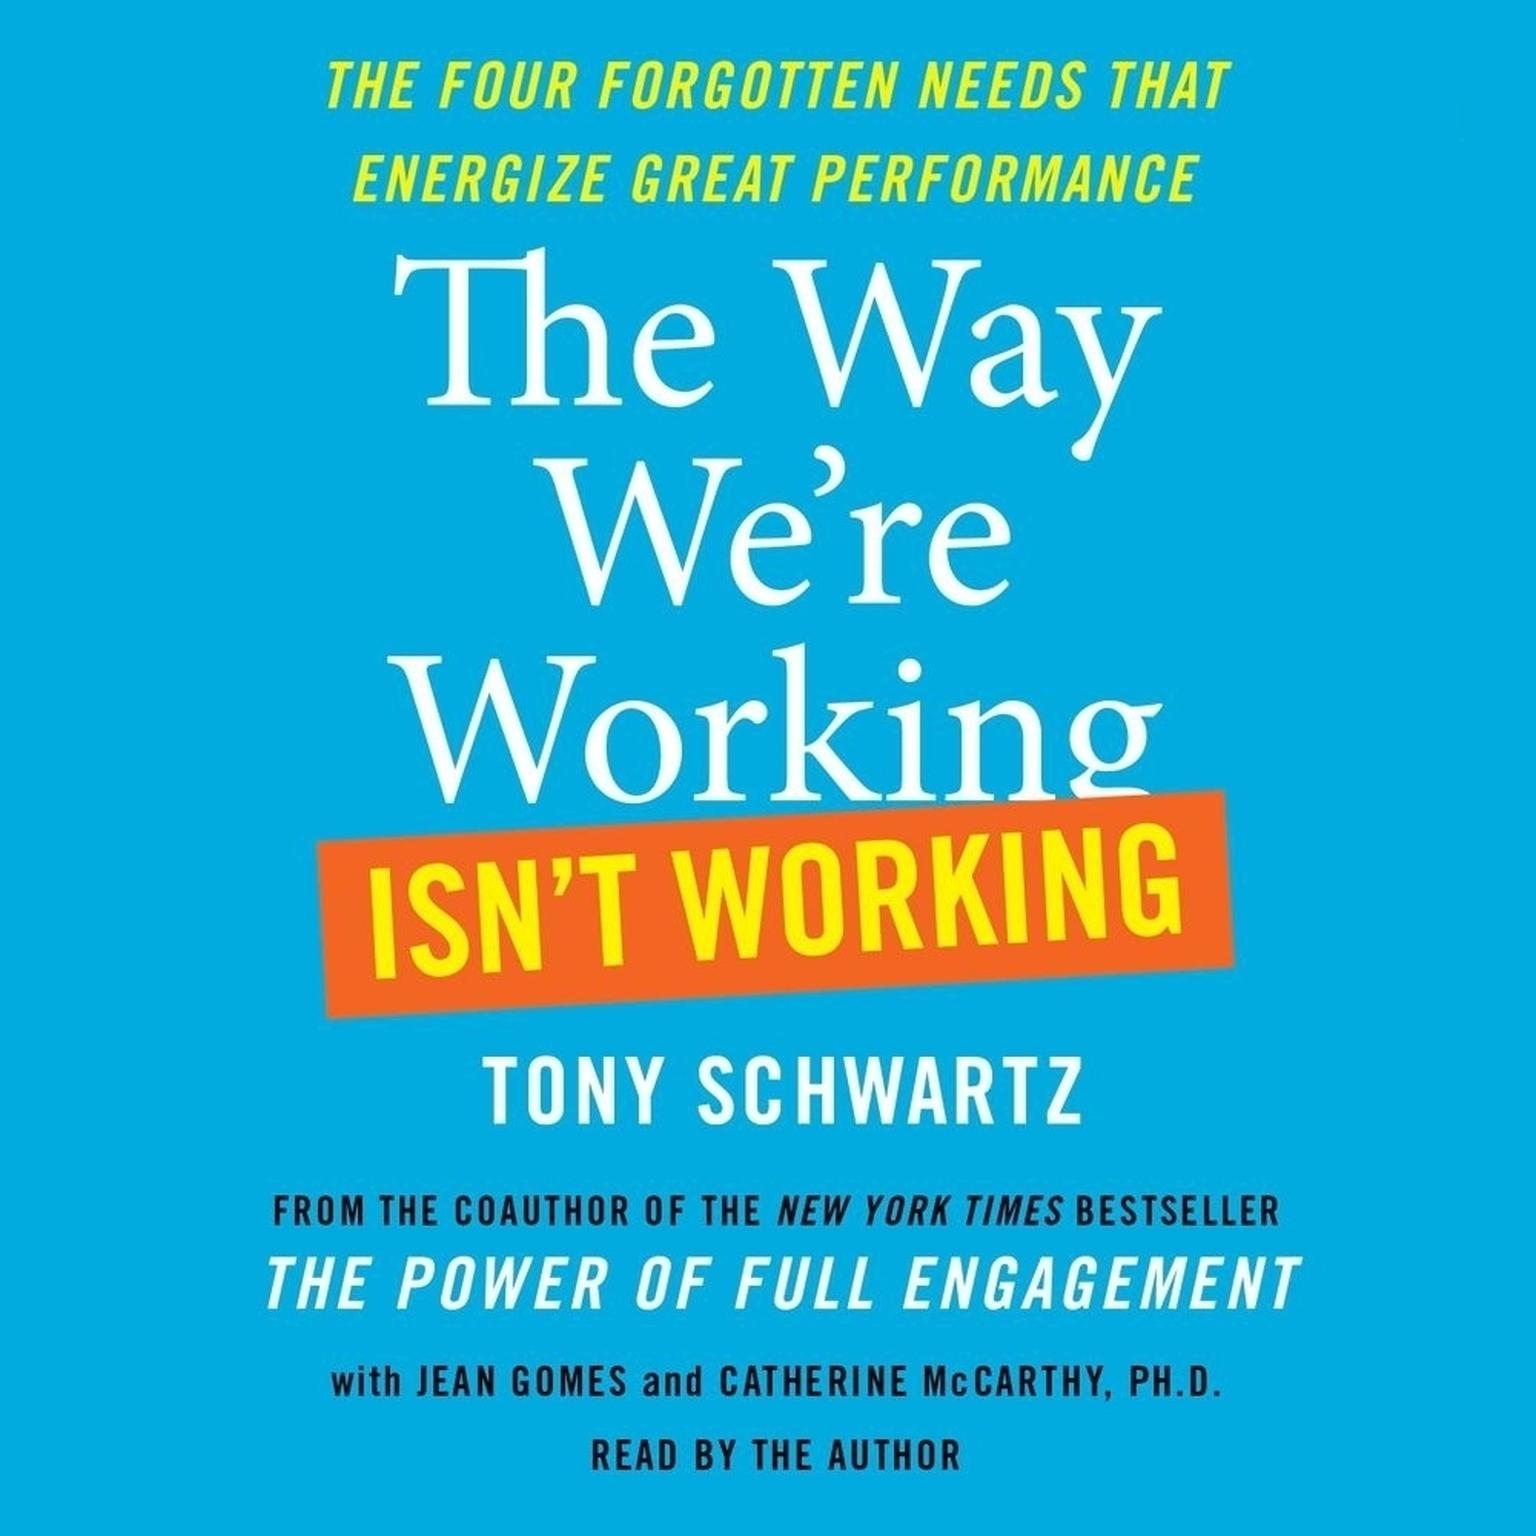 The Way Were Working Isnt Working (Abridged): The Four Forgotten Needs That Energize Great Performance Audiobook, by Tony Schwartz